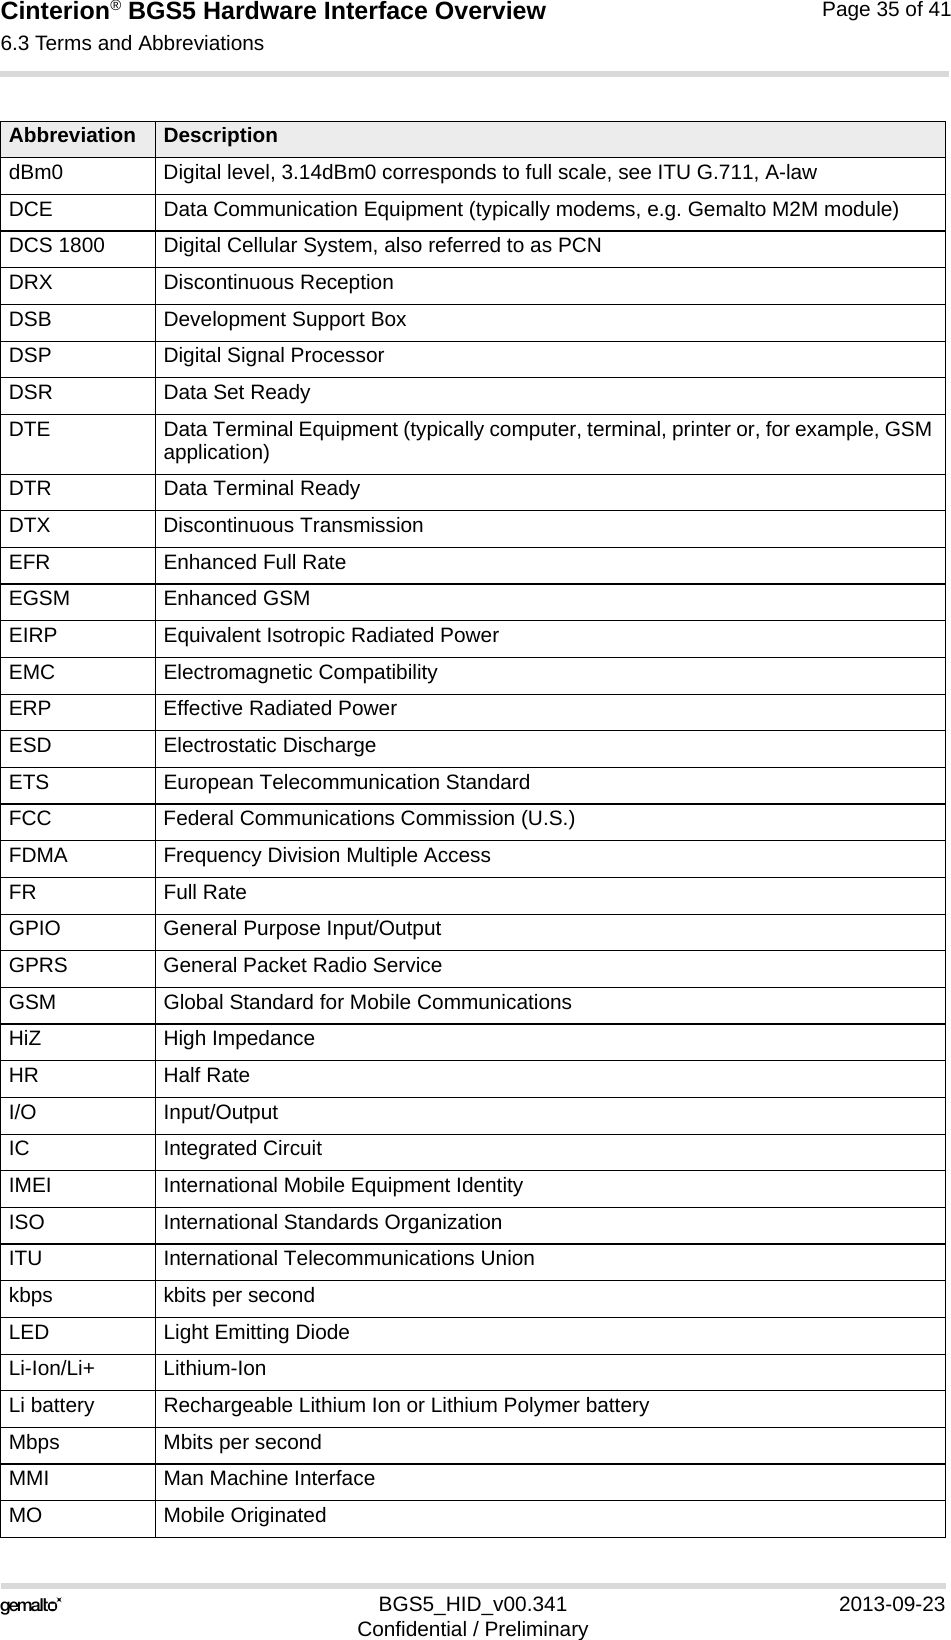 Cinterion® BGS5 Hardware Interface Overview6.3 Terms and Abbreviations38BGS5_HID_v00.341 2013-09-23Confidential / PreliminaryPage 35 of 41dBm0 Digital level, 3.14dBm0 corresponds to full scale, see ITU G.711, A-lawDCE Data Communication Equipment (typically modems, e.g. Gemalto M2M module)DCS 1800 Digital Cellular System, also referred to as PCNDRX Discontinuous ReceptionDSB Development Support BoxDSP Digital Signal ProcessorDSR Data Set ReadyDTE Data Terminal Equipment (typically computer, terminal, printer or, for example, GSM application)DTR Data Terminal ReadyDTX Discontinuous TransmissionEFR Enhanced Full RateEGSM Enhanced GSMEIRP Equivalent Isotropic Radiated PowerEMC Electromagnetic CompatibilityERP Effective Radiated PowerESD Electrostatic DischargeETS European Telecommunication StandardFCC Federal Communications Commission (U.S.)FDMA Frequency Division Multiple AccessFR Full RateGPIO General Purpose Input/OutputGPRS General Packet Radio ServiceGSM Global Standard for Mobile CommunicationsHiZ High ImpedanceHR Half RateI/O Input/OutputIC Integrated CircuitIMEI International Mobile Equipment IdentityISO International Standards OrganizationITU International Telecommunications Unionkbps kbits per secondLED Light Emitting DiodeLi-Ion/Li+ Lithium-IonLi battery Rechargeable Lithium Ion or Lithium Polymer batteryMbps Mbits per secondMMI Man Machine InterfaceMO Mobile OriginatedAbbreviation Description